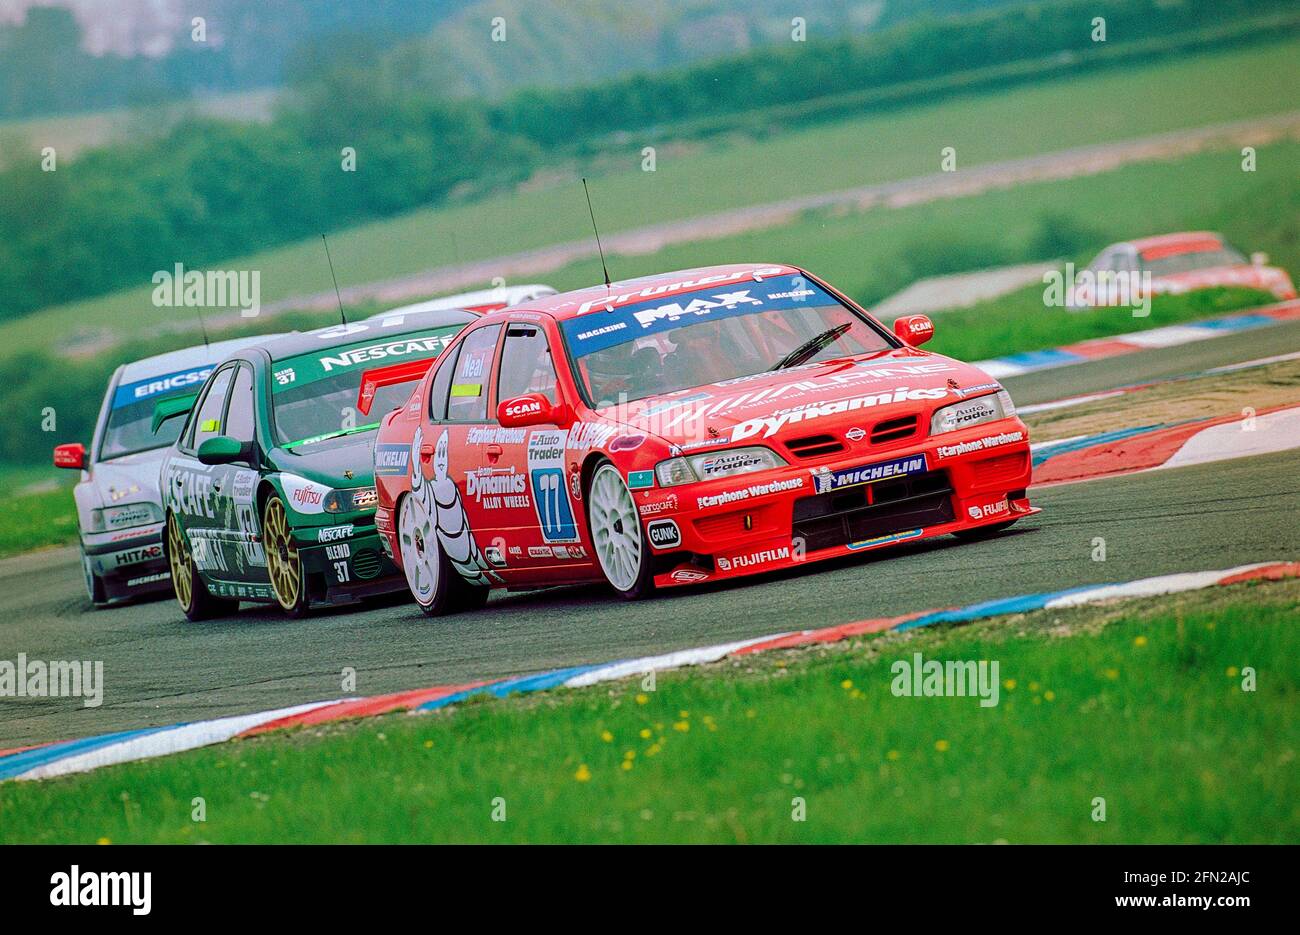 Matt Neal at Thruxton Circuit during the 1999 British Touring Car Championship driving his Max Power Racing Team Dynamics Nissan Primera GT being hotly pursued through club chicane. Stock Photo